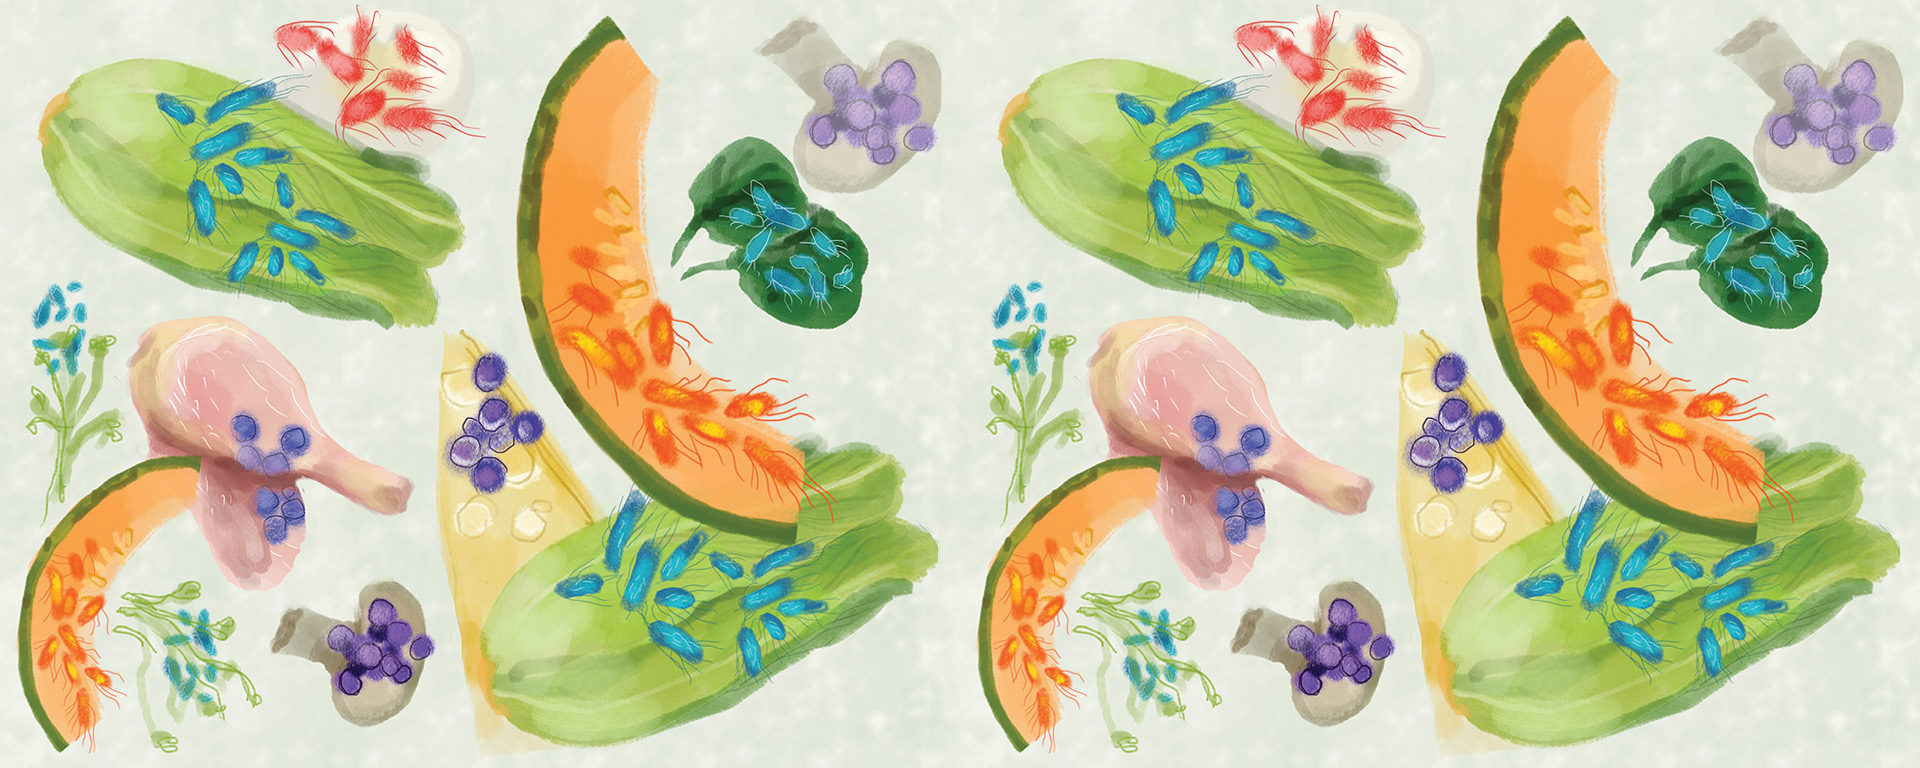 Microbes illustrated by Annie Bakst.